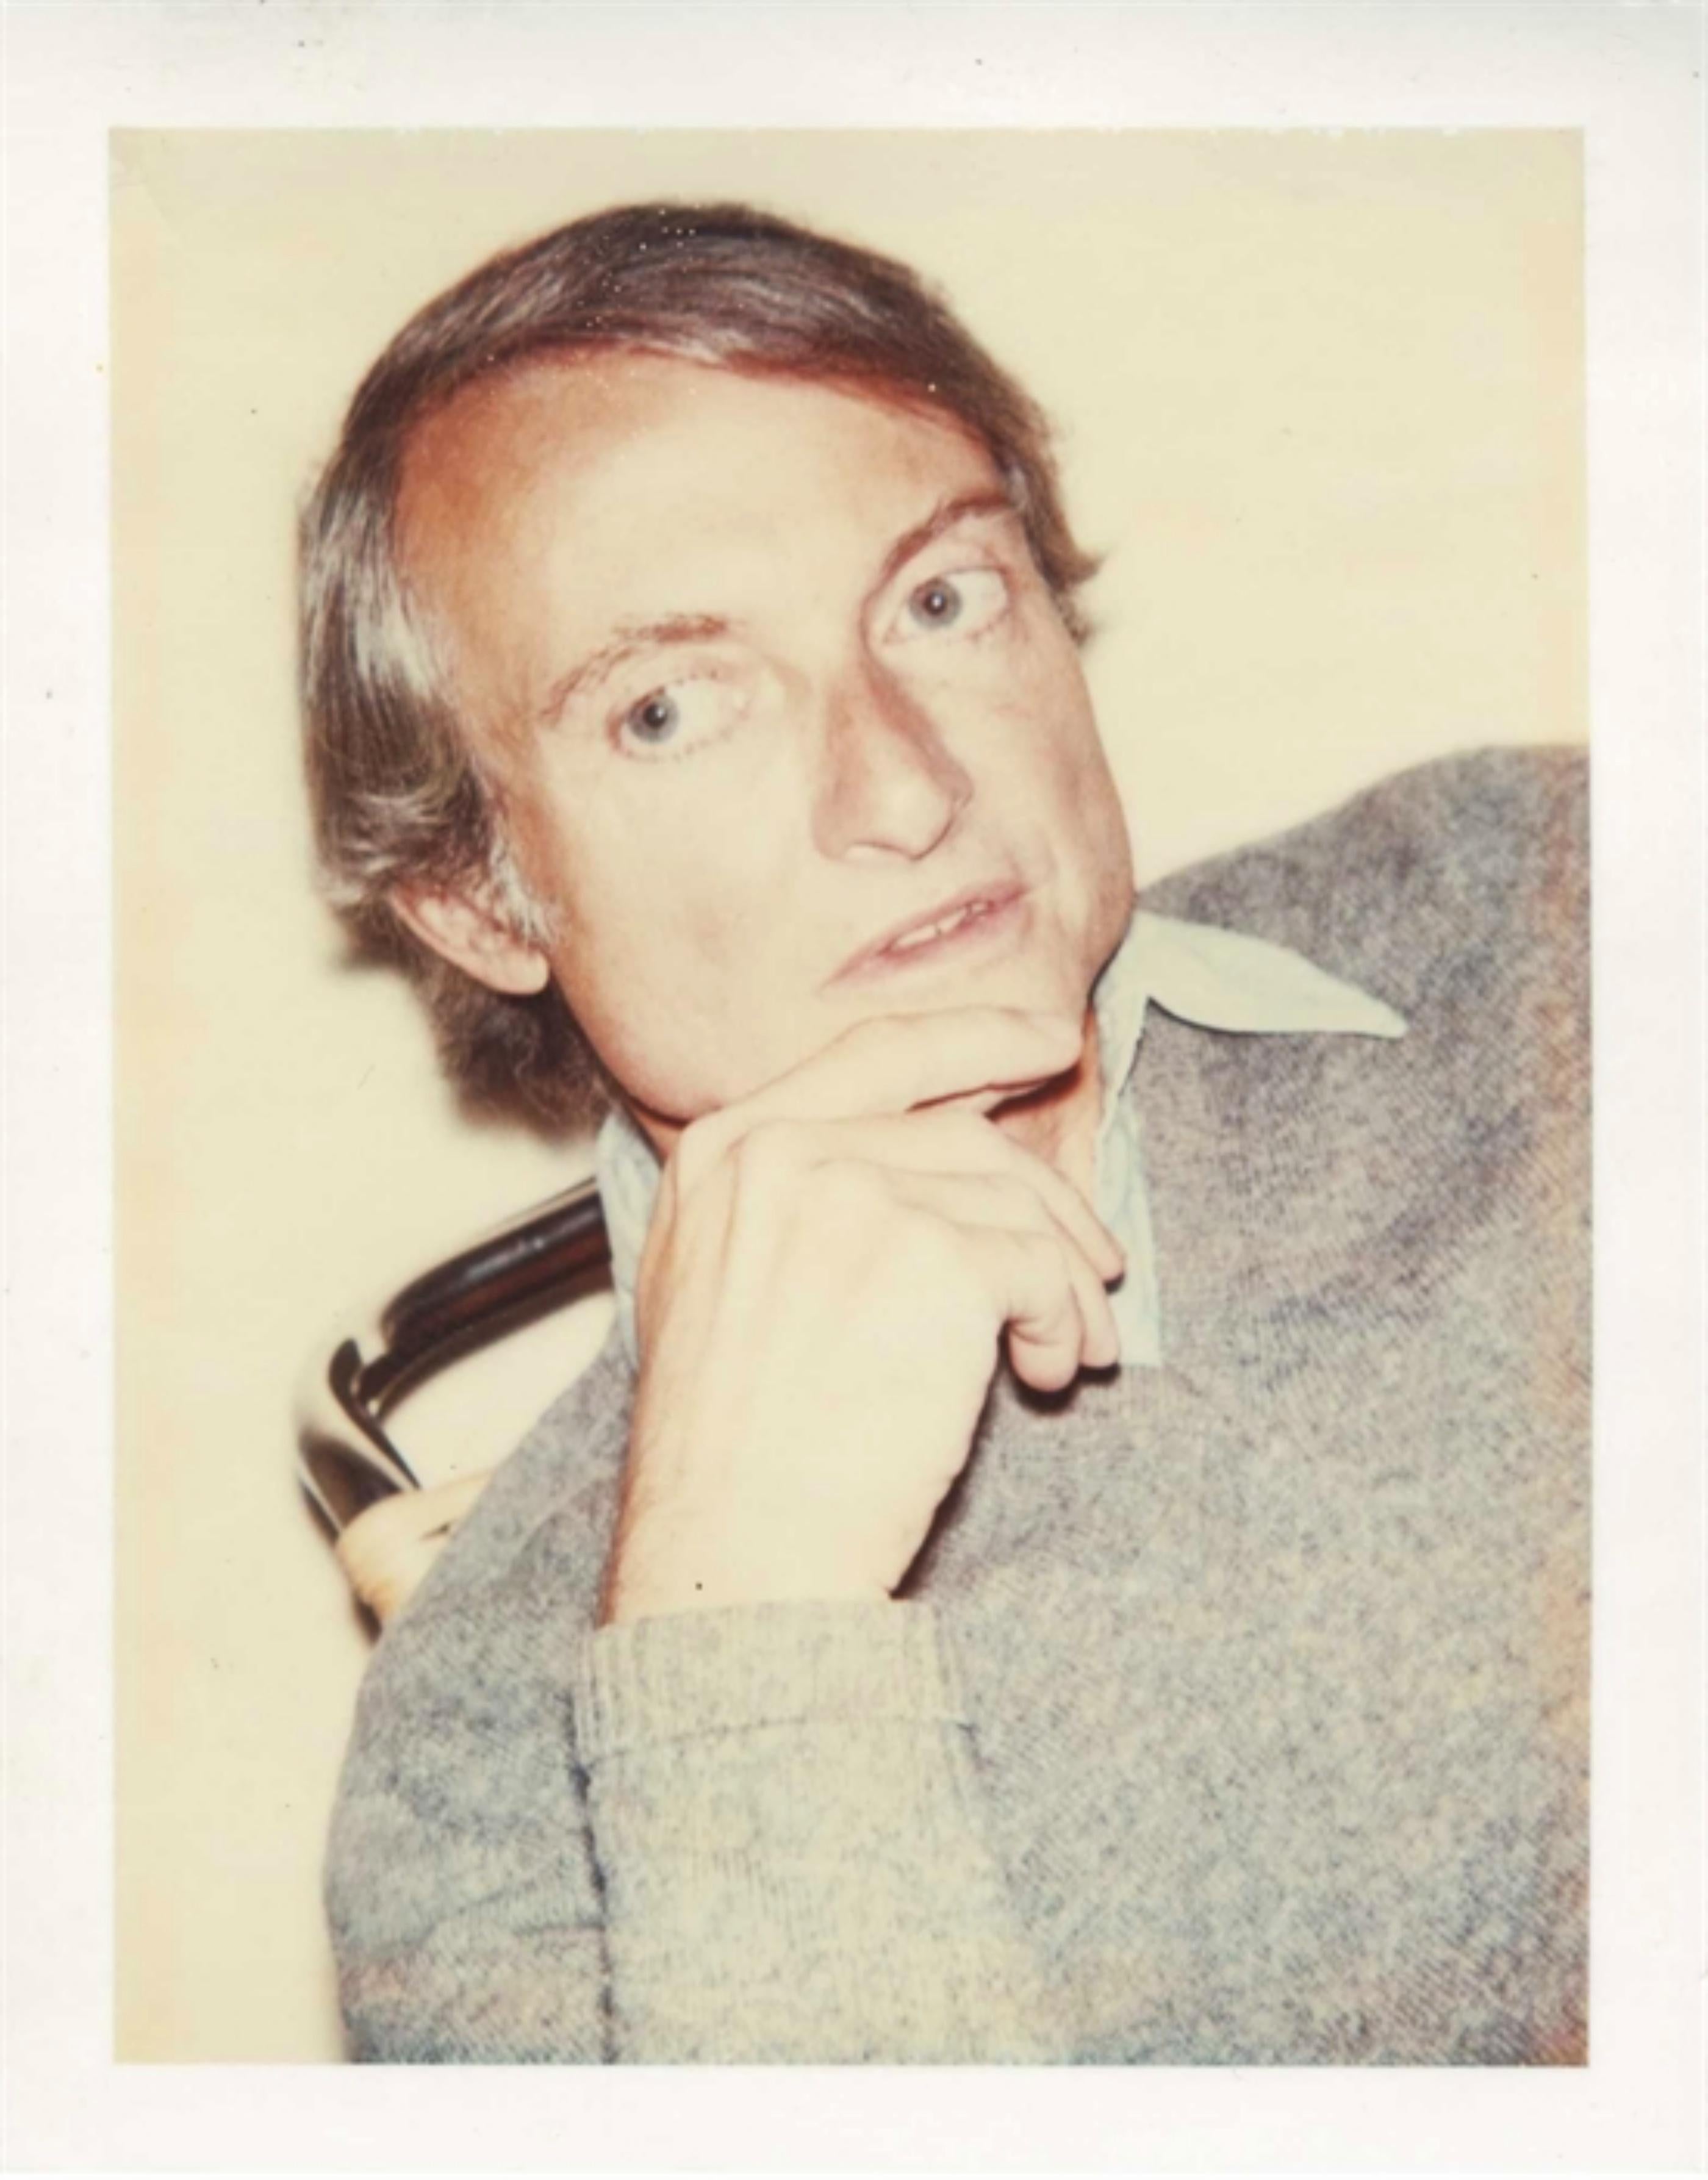 Andy Warhol
Portrait of Roy Lichtenstein, 1975
Polaroid dye-diffusion print
Authenticated by the Andy Warhol Foundation for the Visual Arts, bears the Foundation stamp verso
Frame included: Framed in white wood frame with UV plexiglass; with die-cut